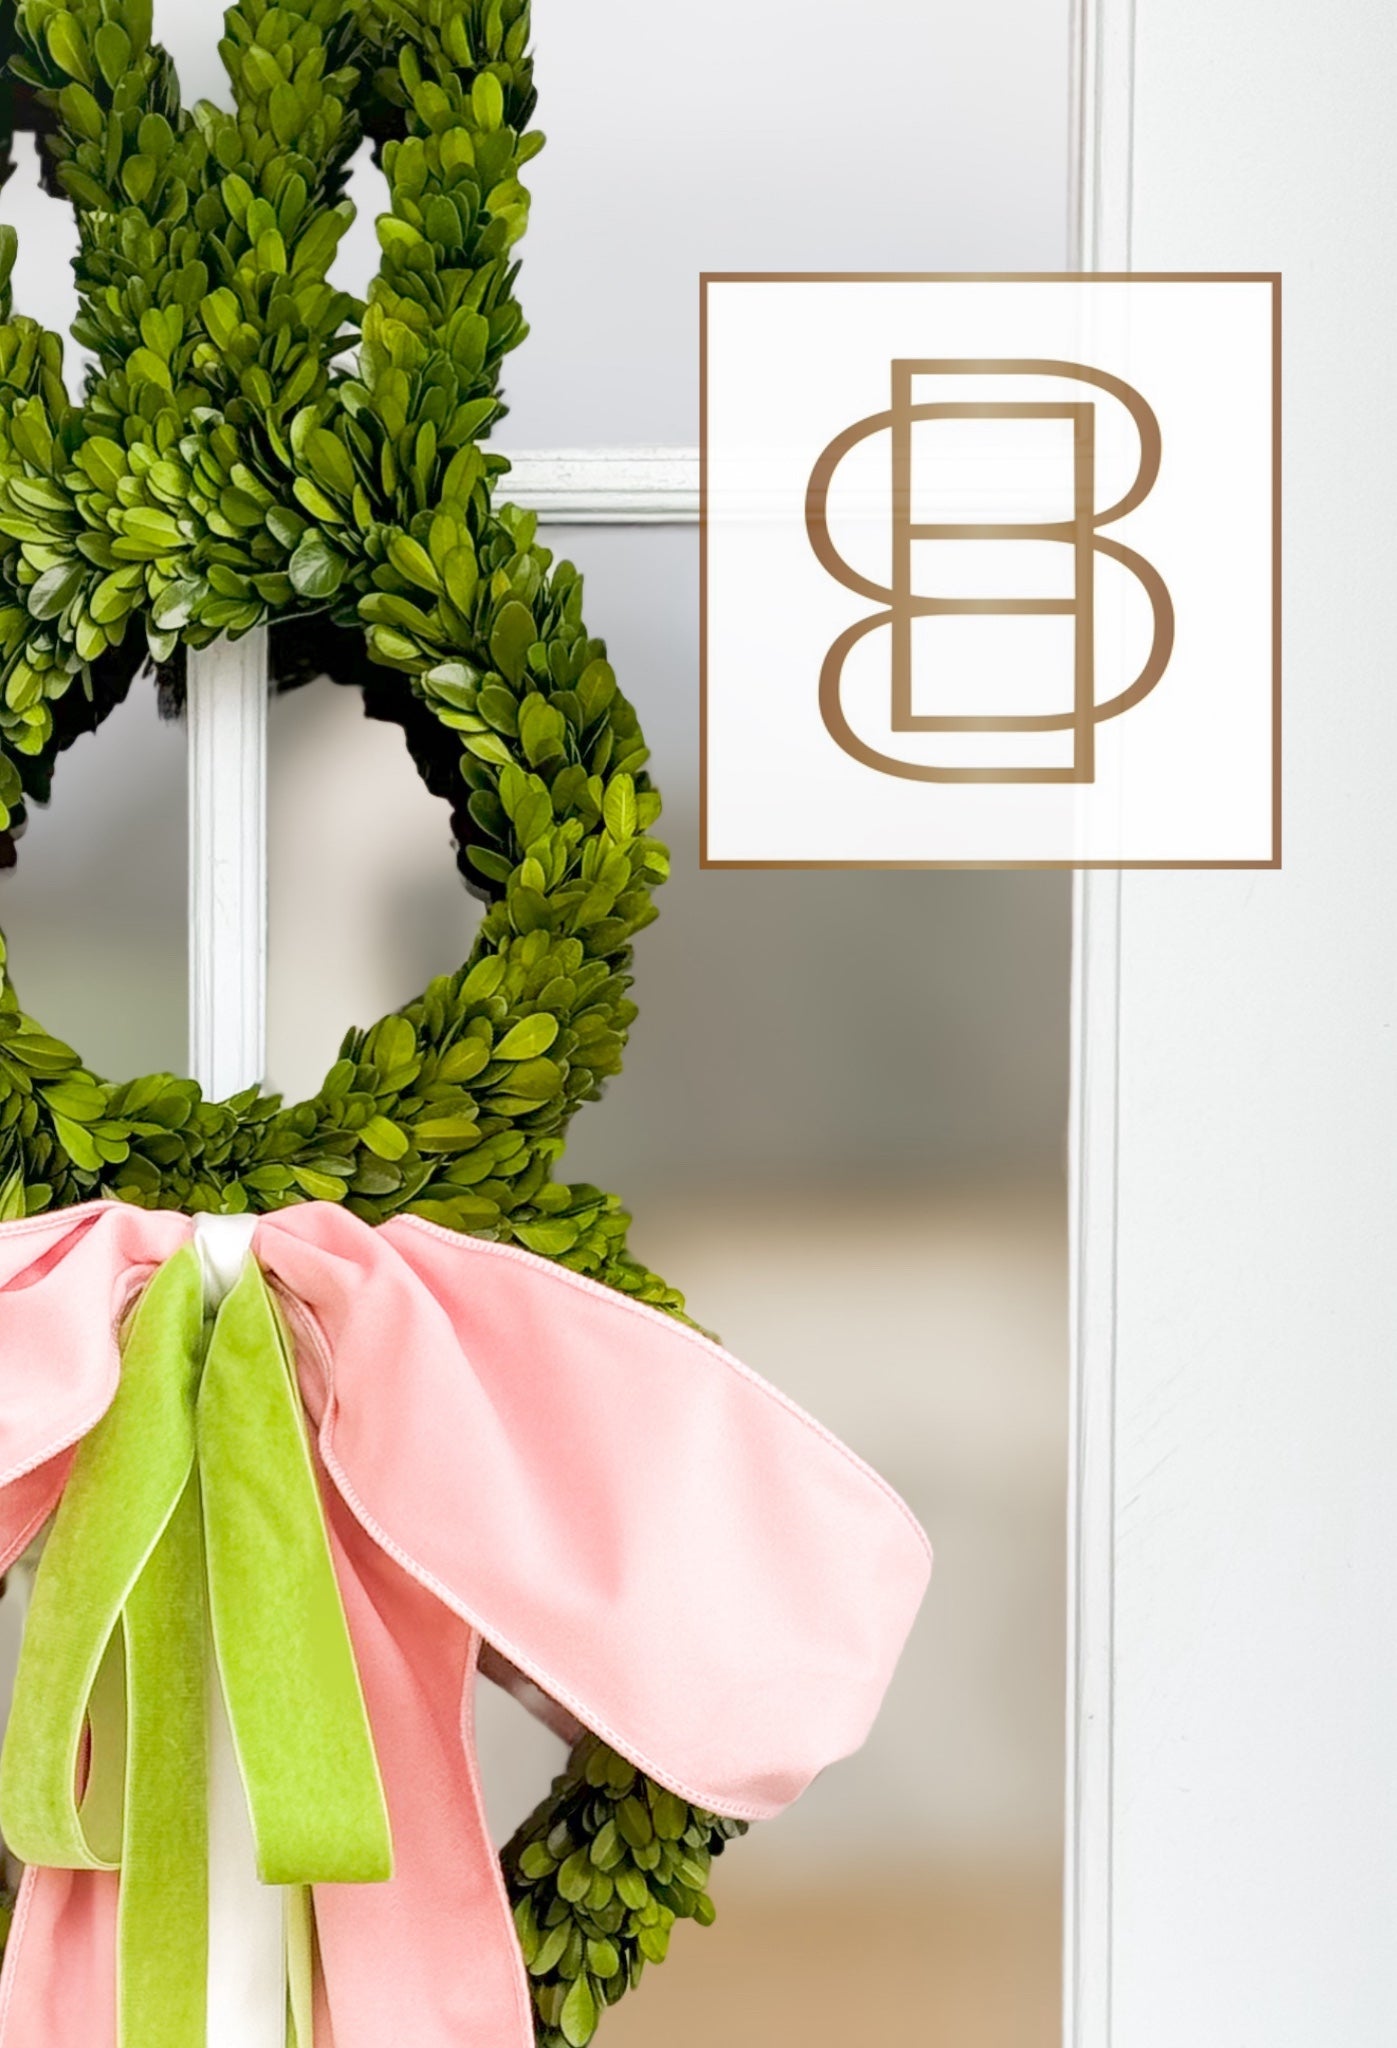 The Blissful Bow And Bunny Wreath